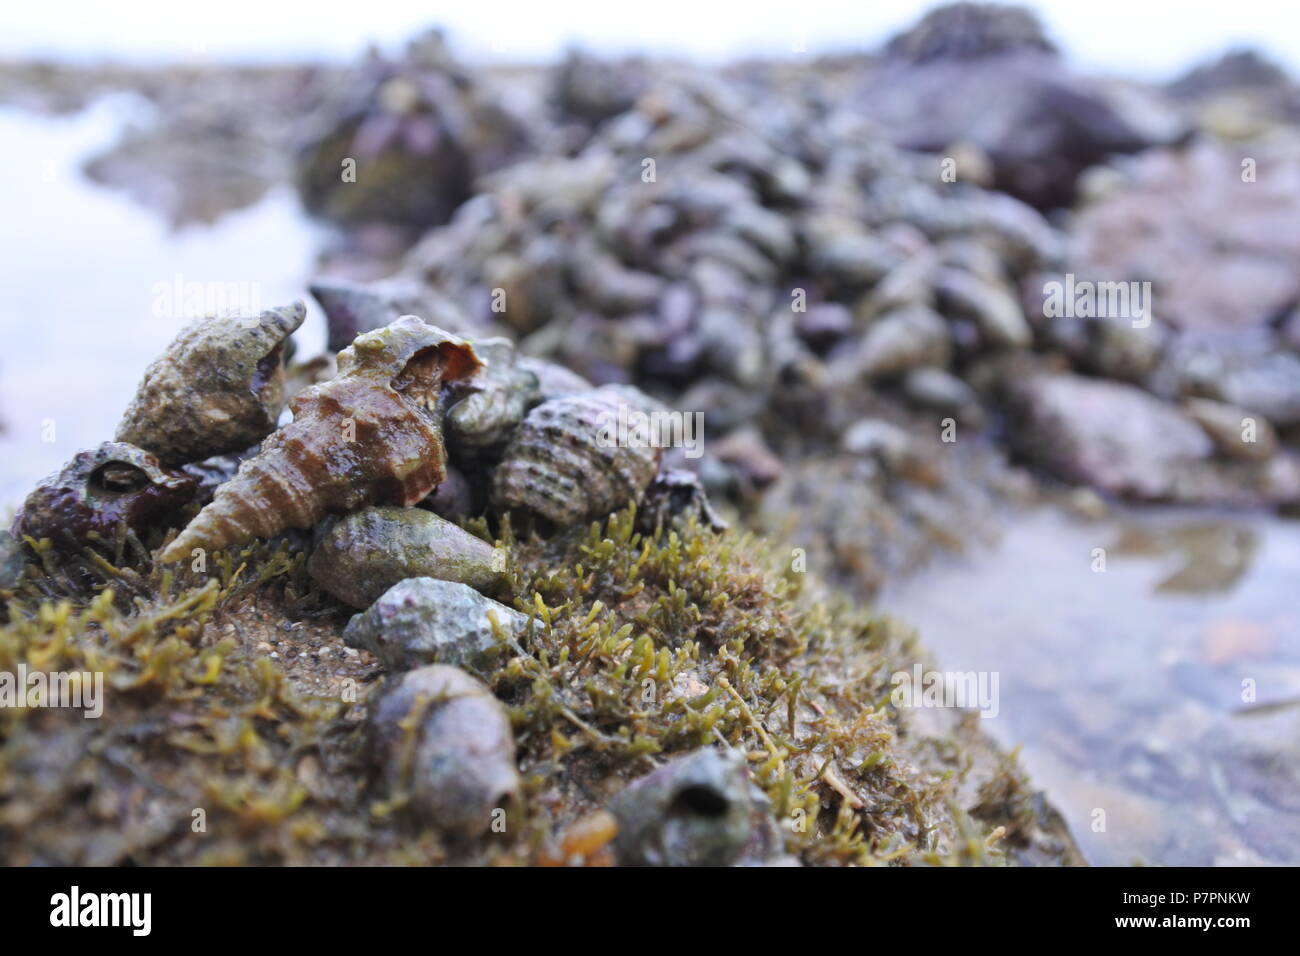 A gathering of snails emerges as the tide recedes, perched upon a moss-covered rock, creating a picturesque scene. Stock Photo